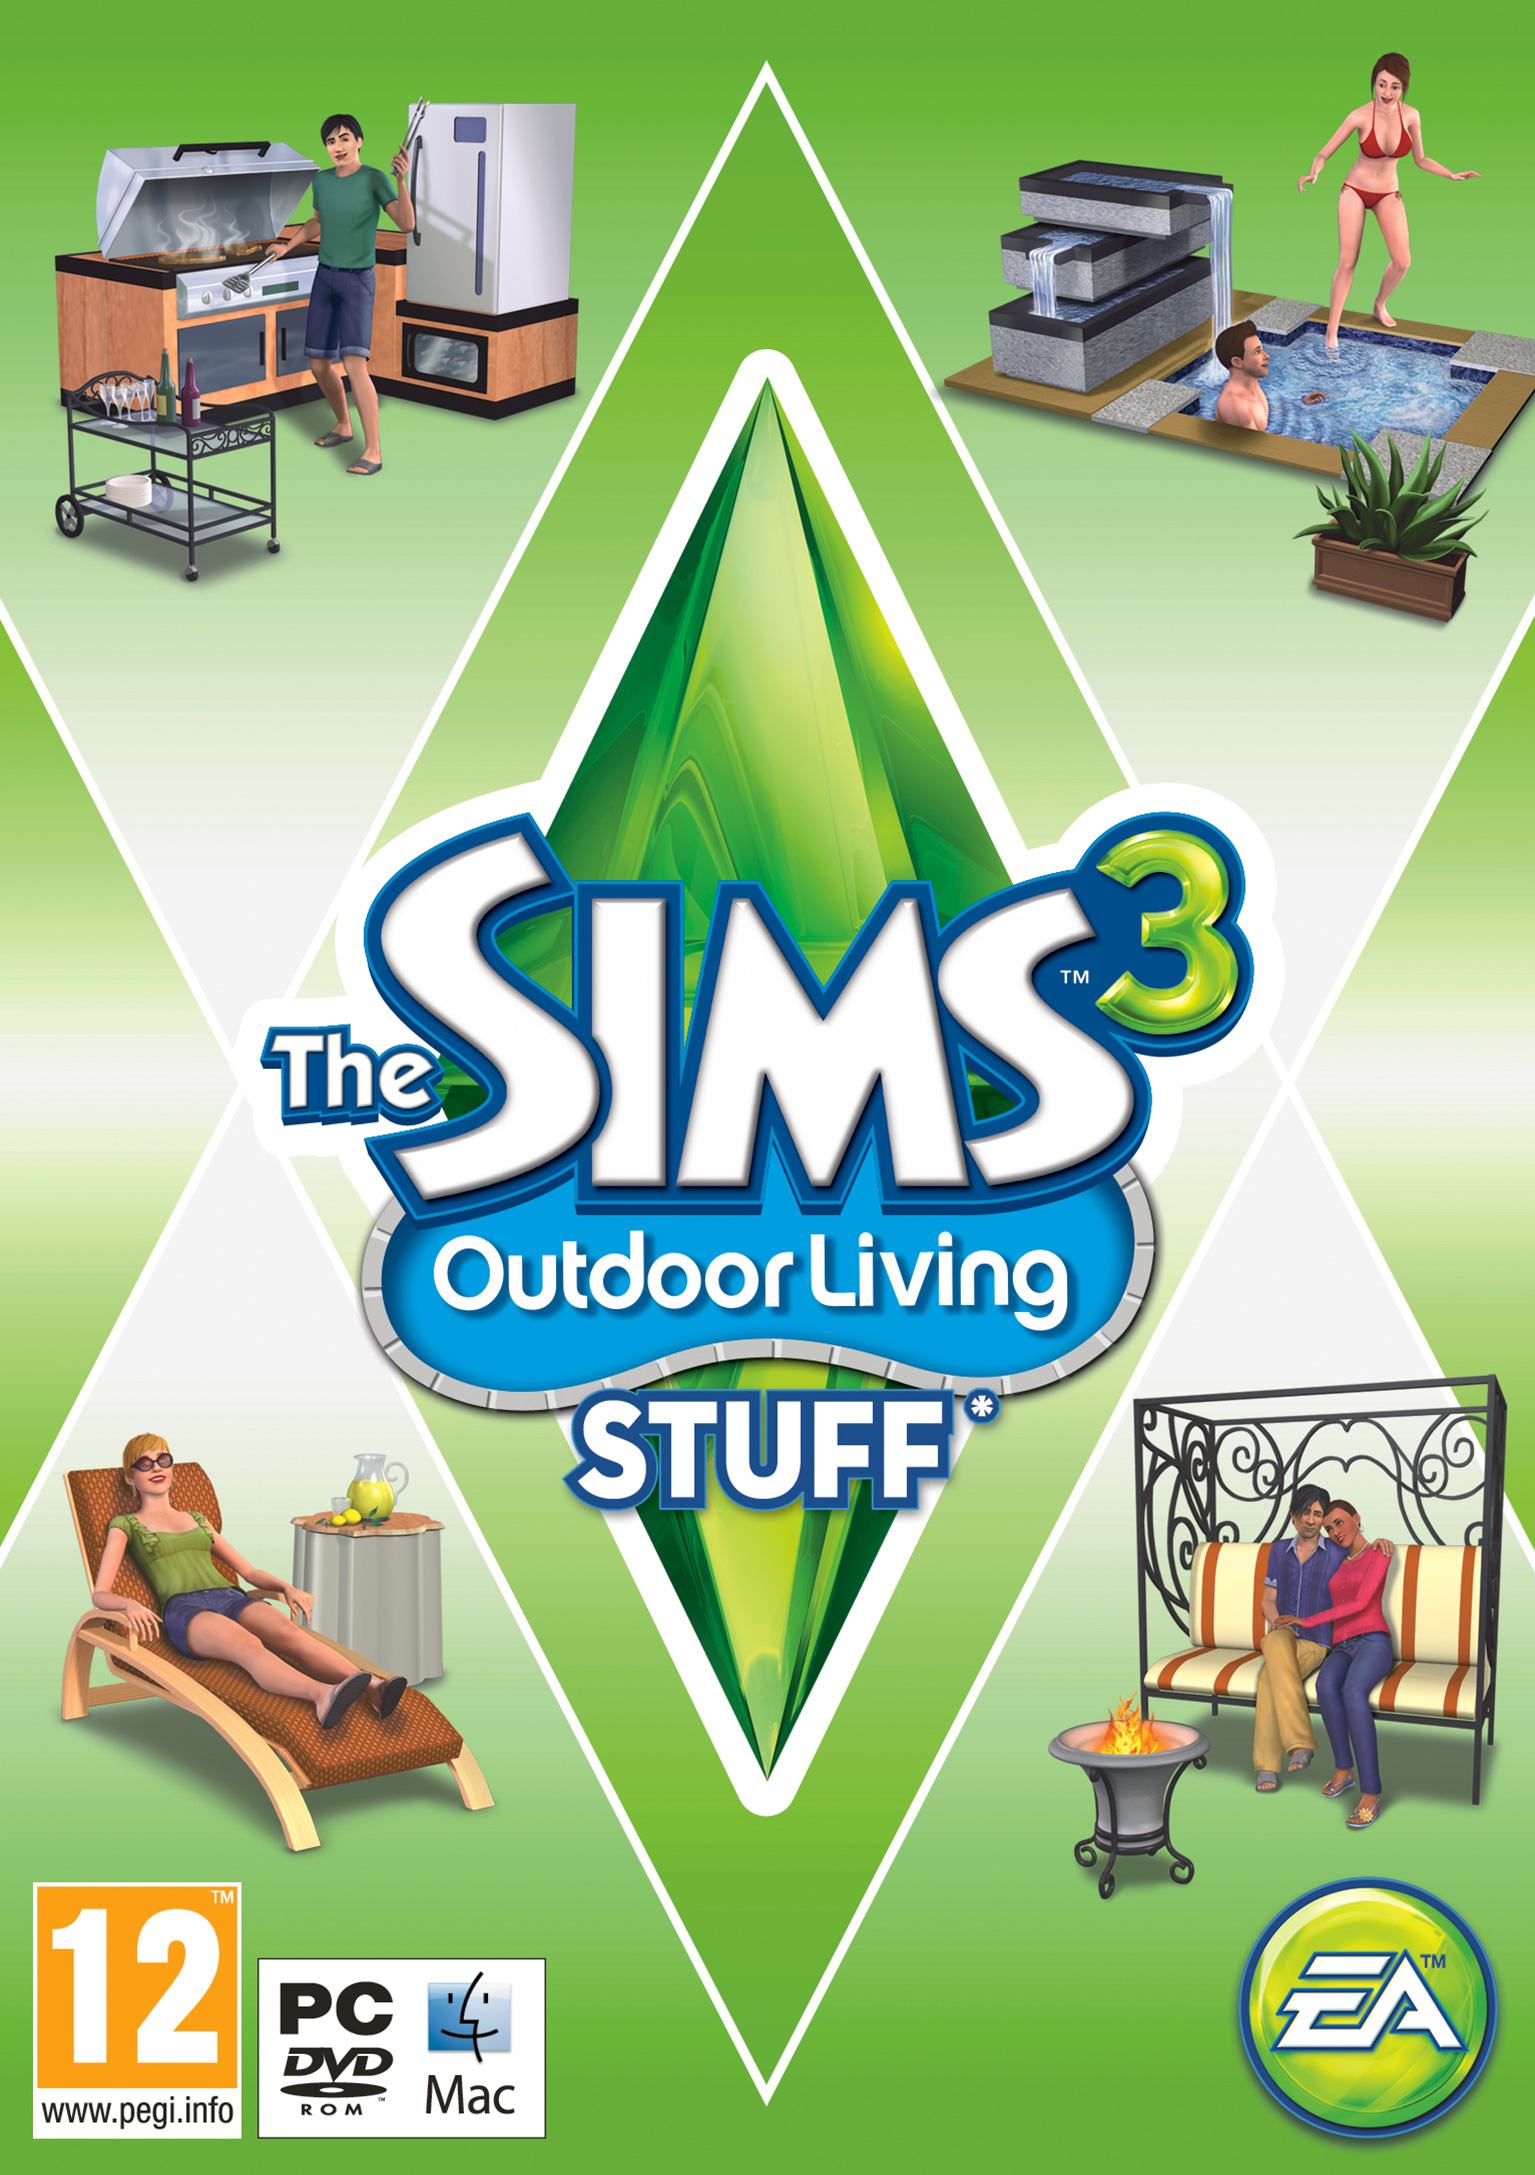 Sims 3 Pets Cheapest Price Uk